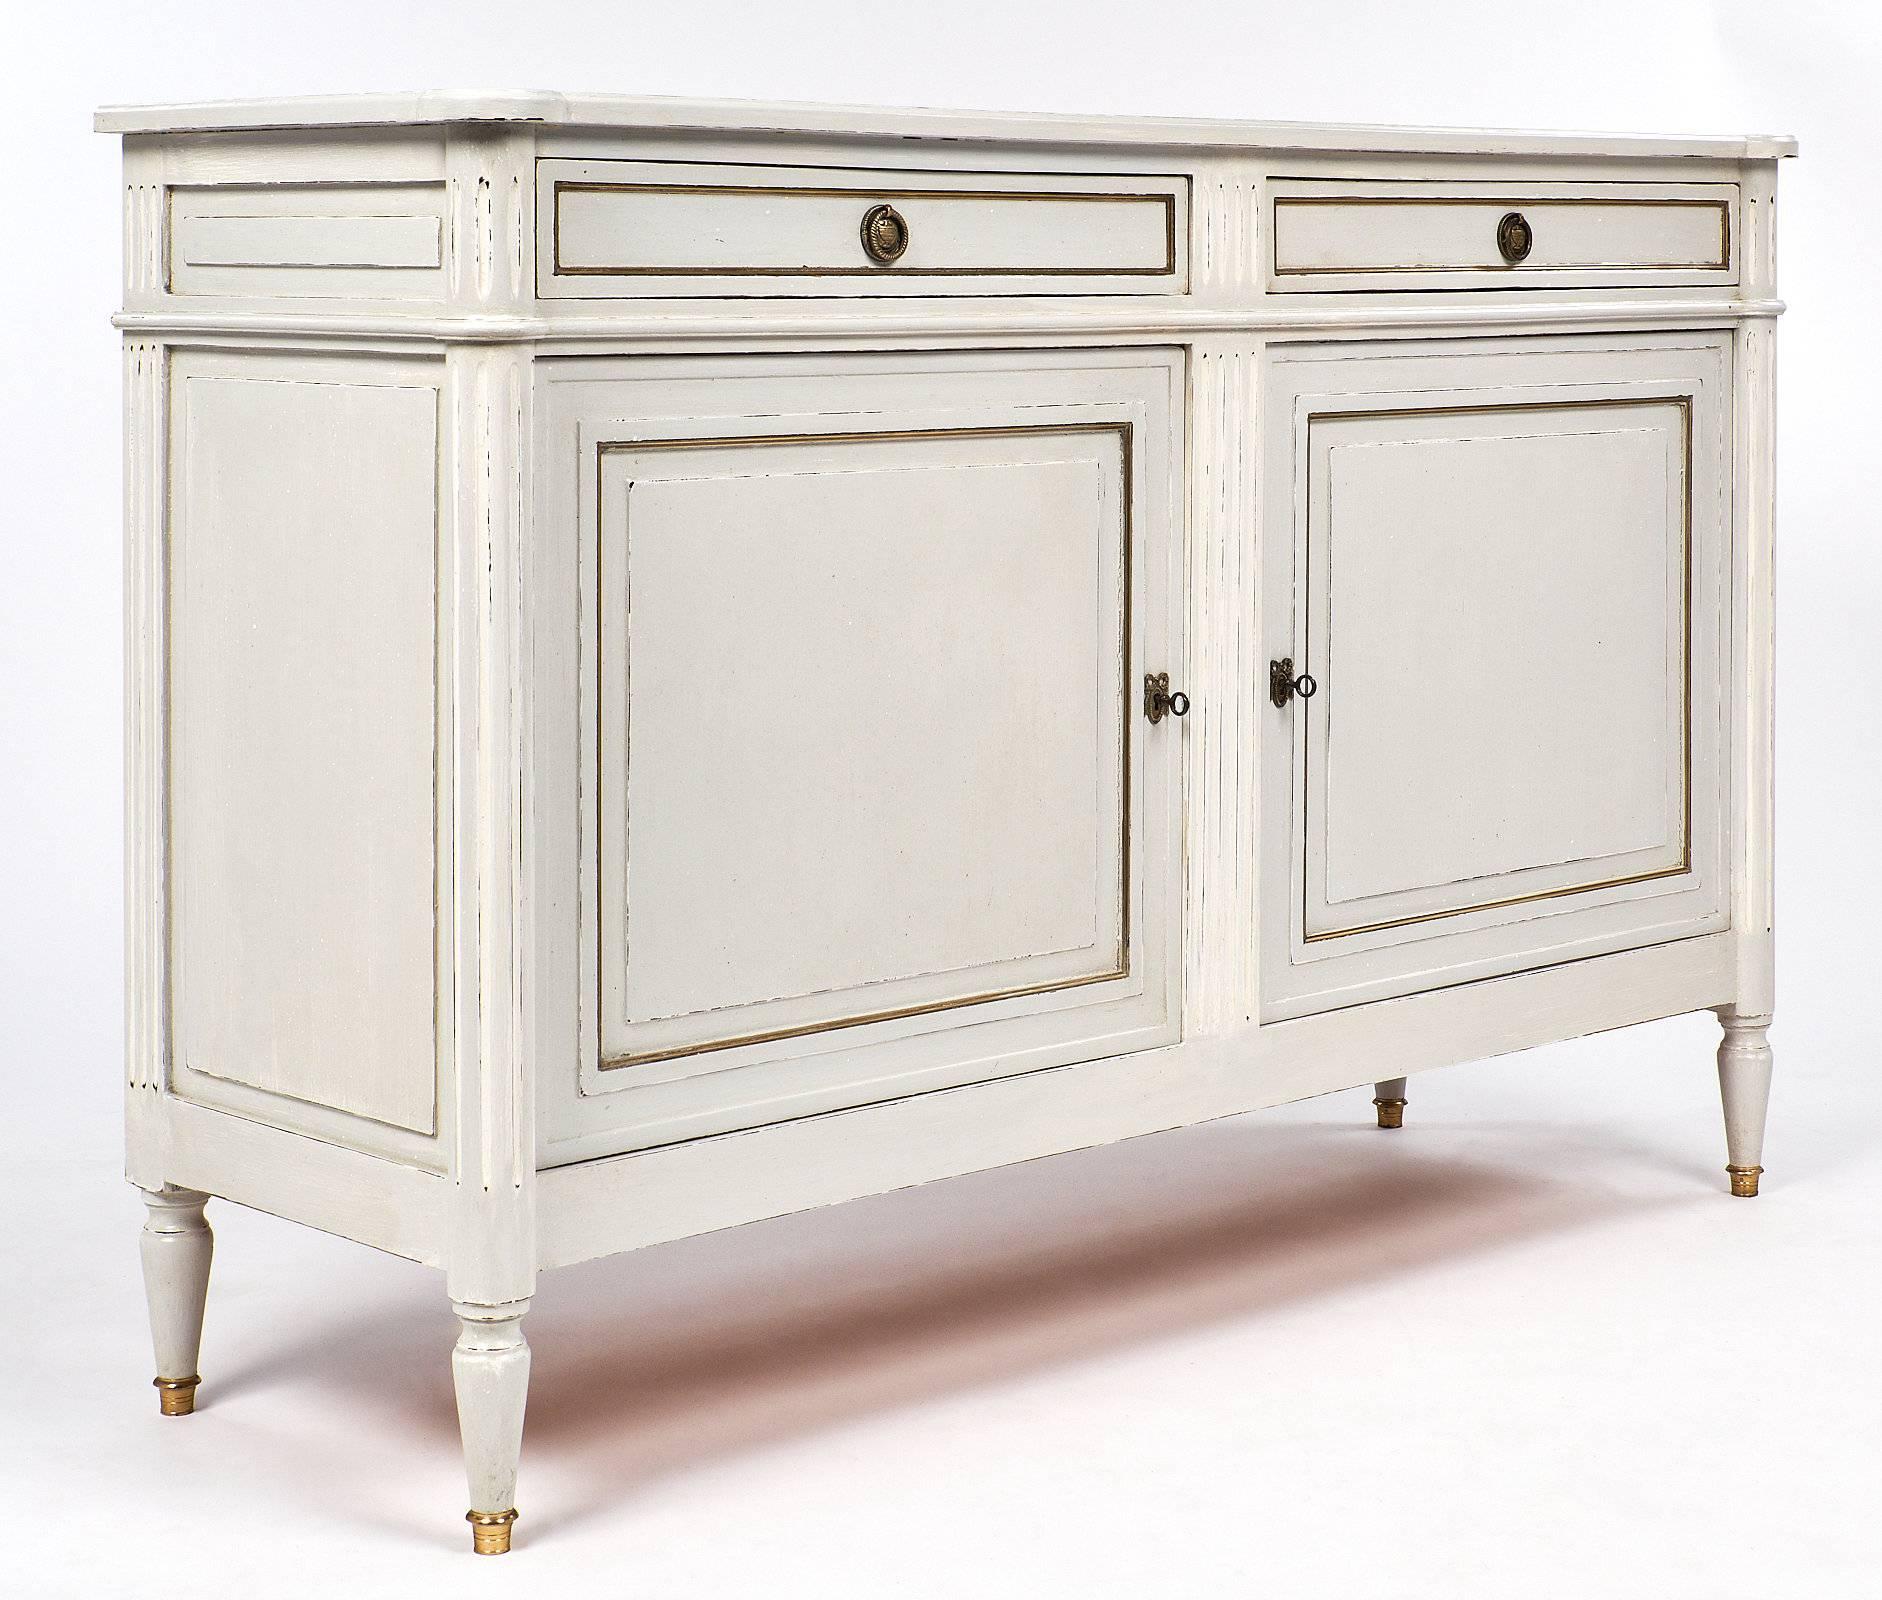 Early 20th Century Louis XVI Style Antique Painted French Buffet